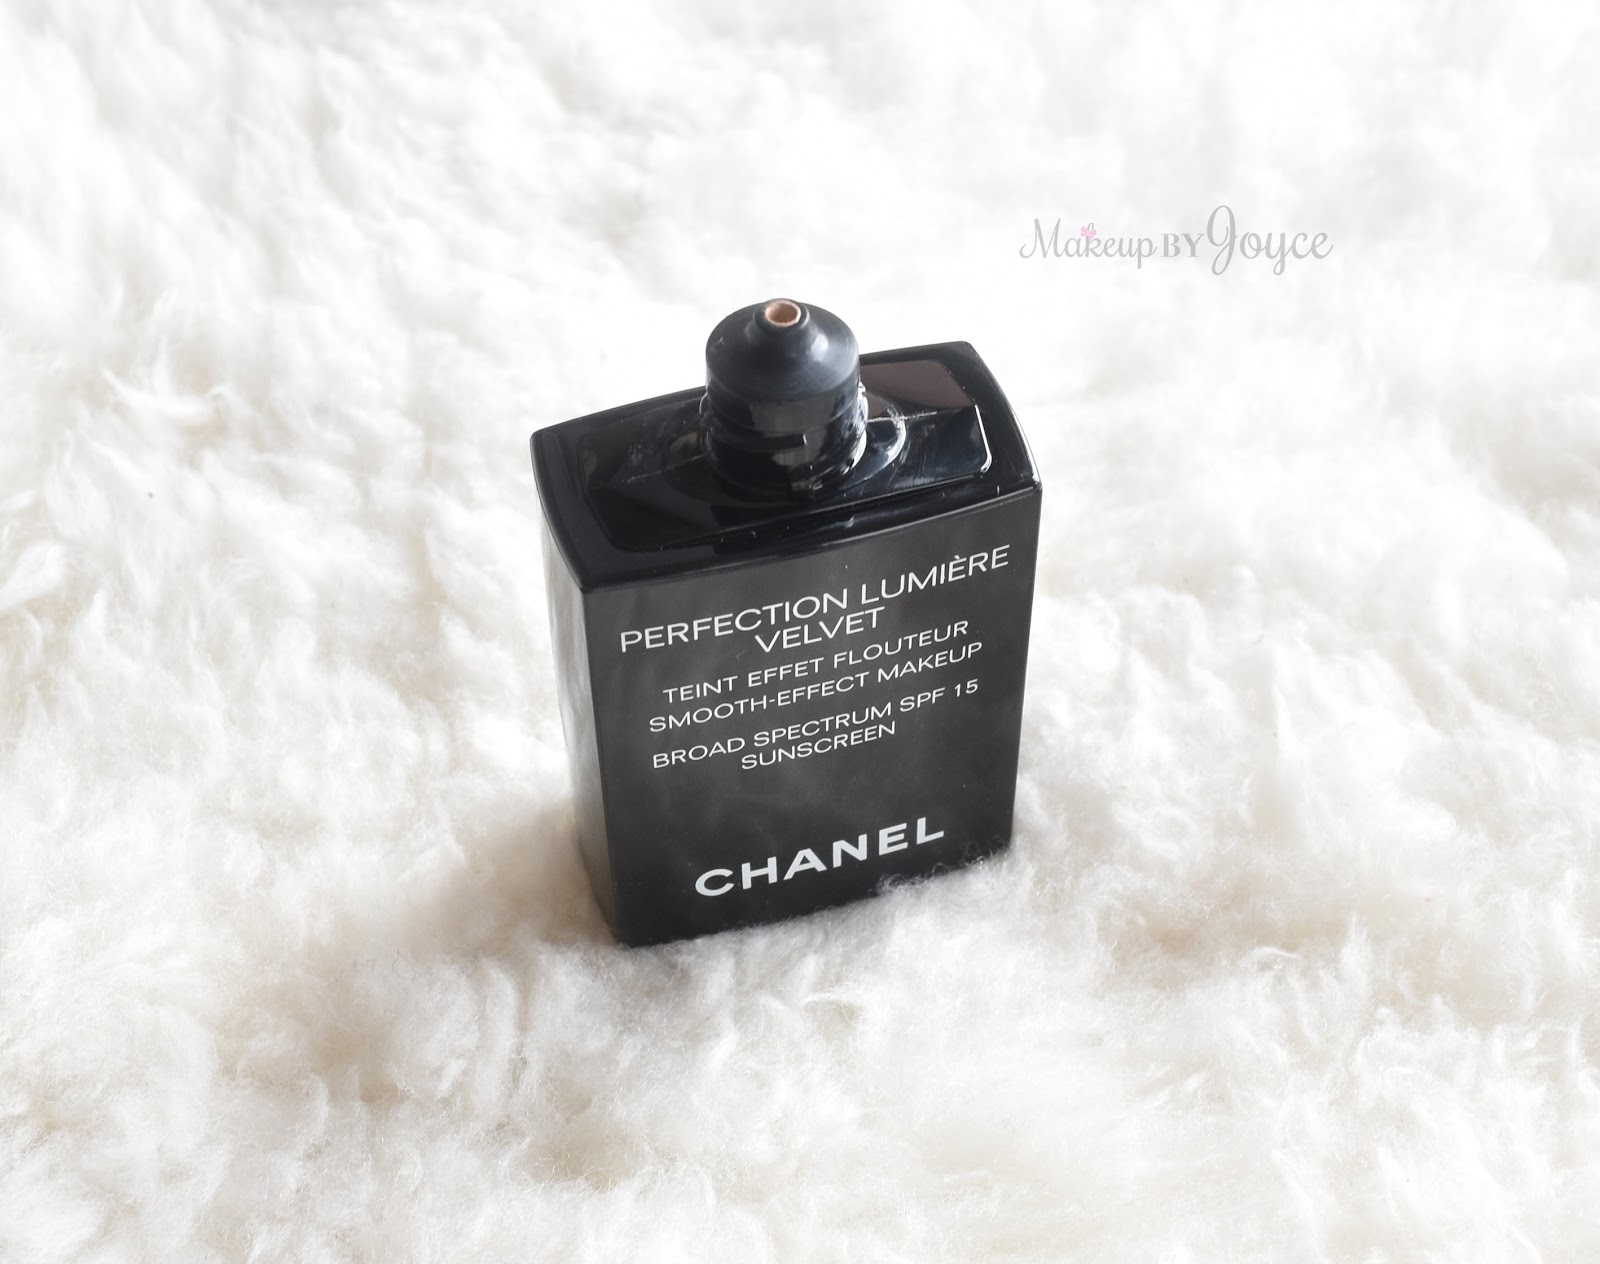 The Review: Chanel Perfection Lumiere Velvet Smooth-Effect Makeup